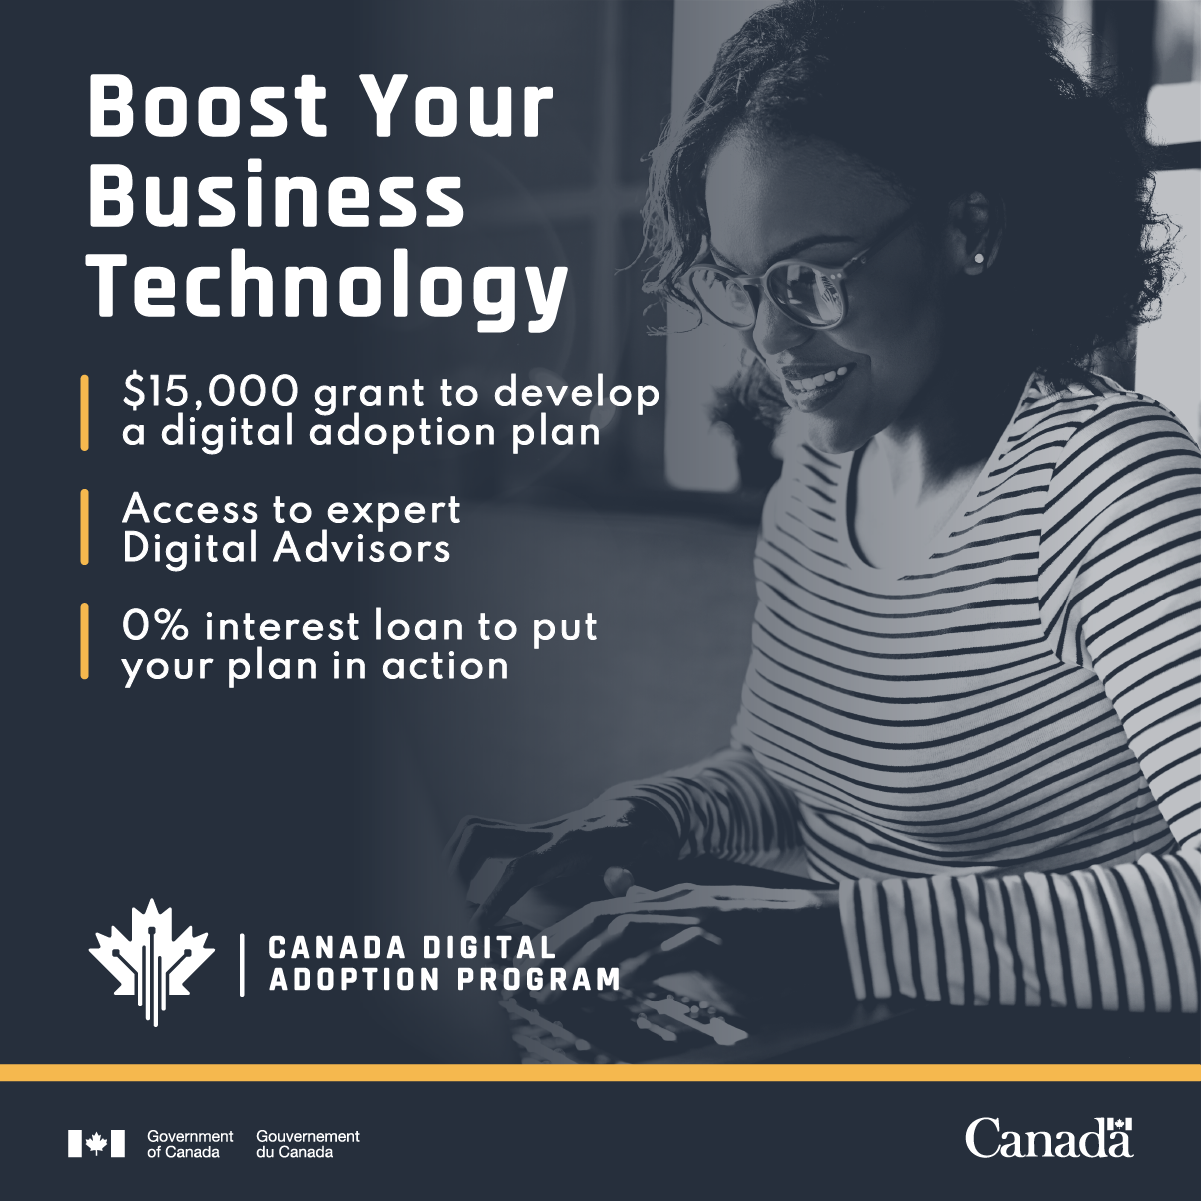 Woman wearing glasses and a striped long-sleeve shirt smiles while typing on her laptop. With text: Boost Your Business Technology; $15,000 grant to develop a digital adoption plan; access to expert digital advisors; 0% interest loan to put your plan in action; Canada Digital Adoption Program. 